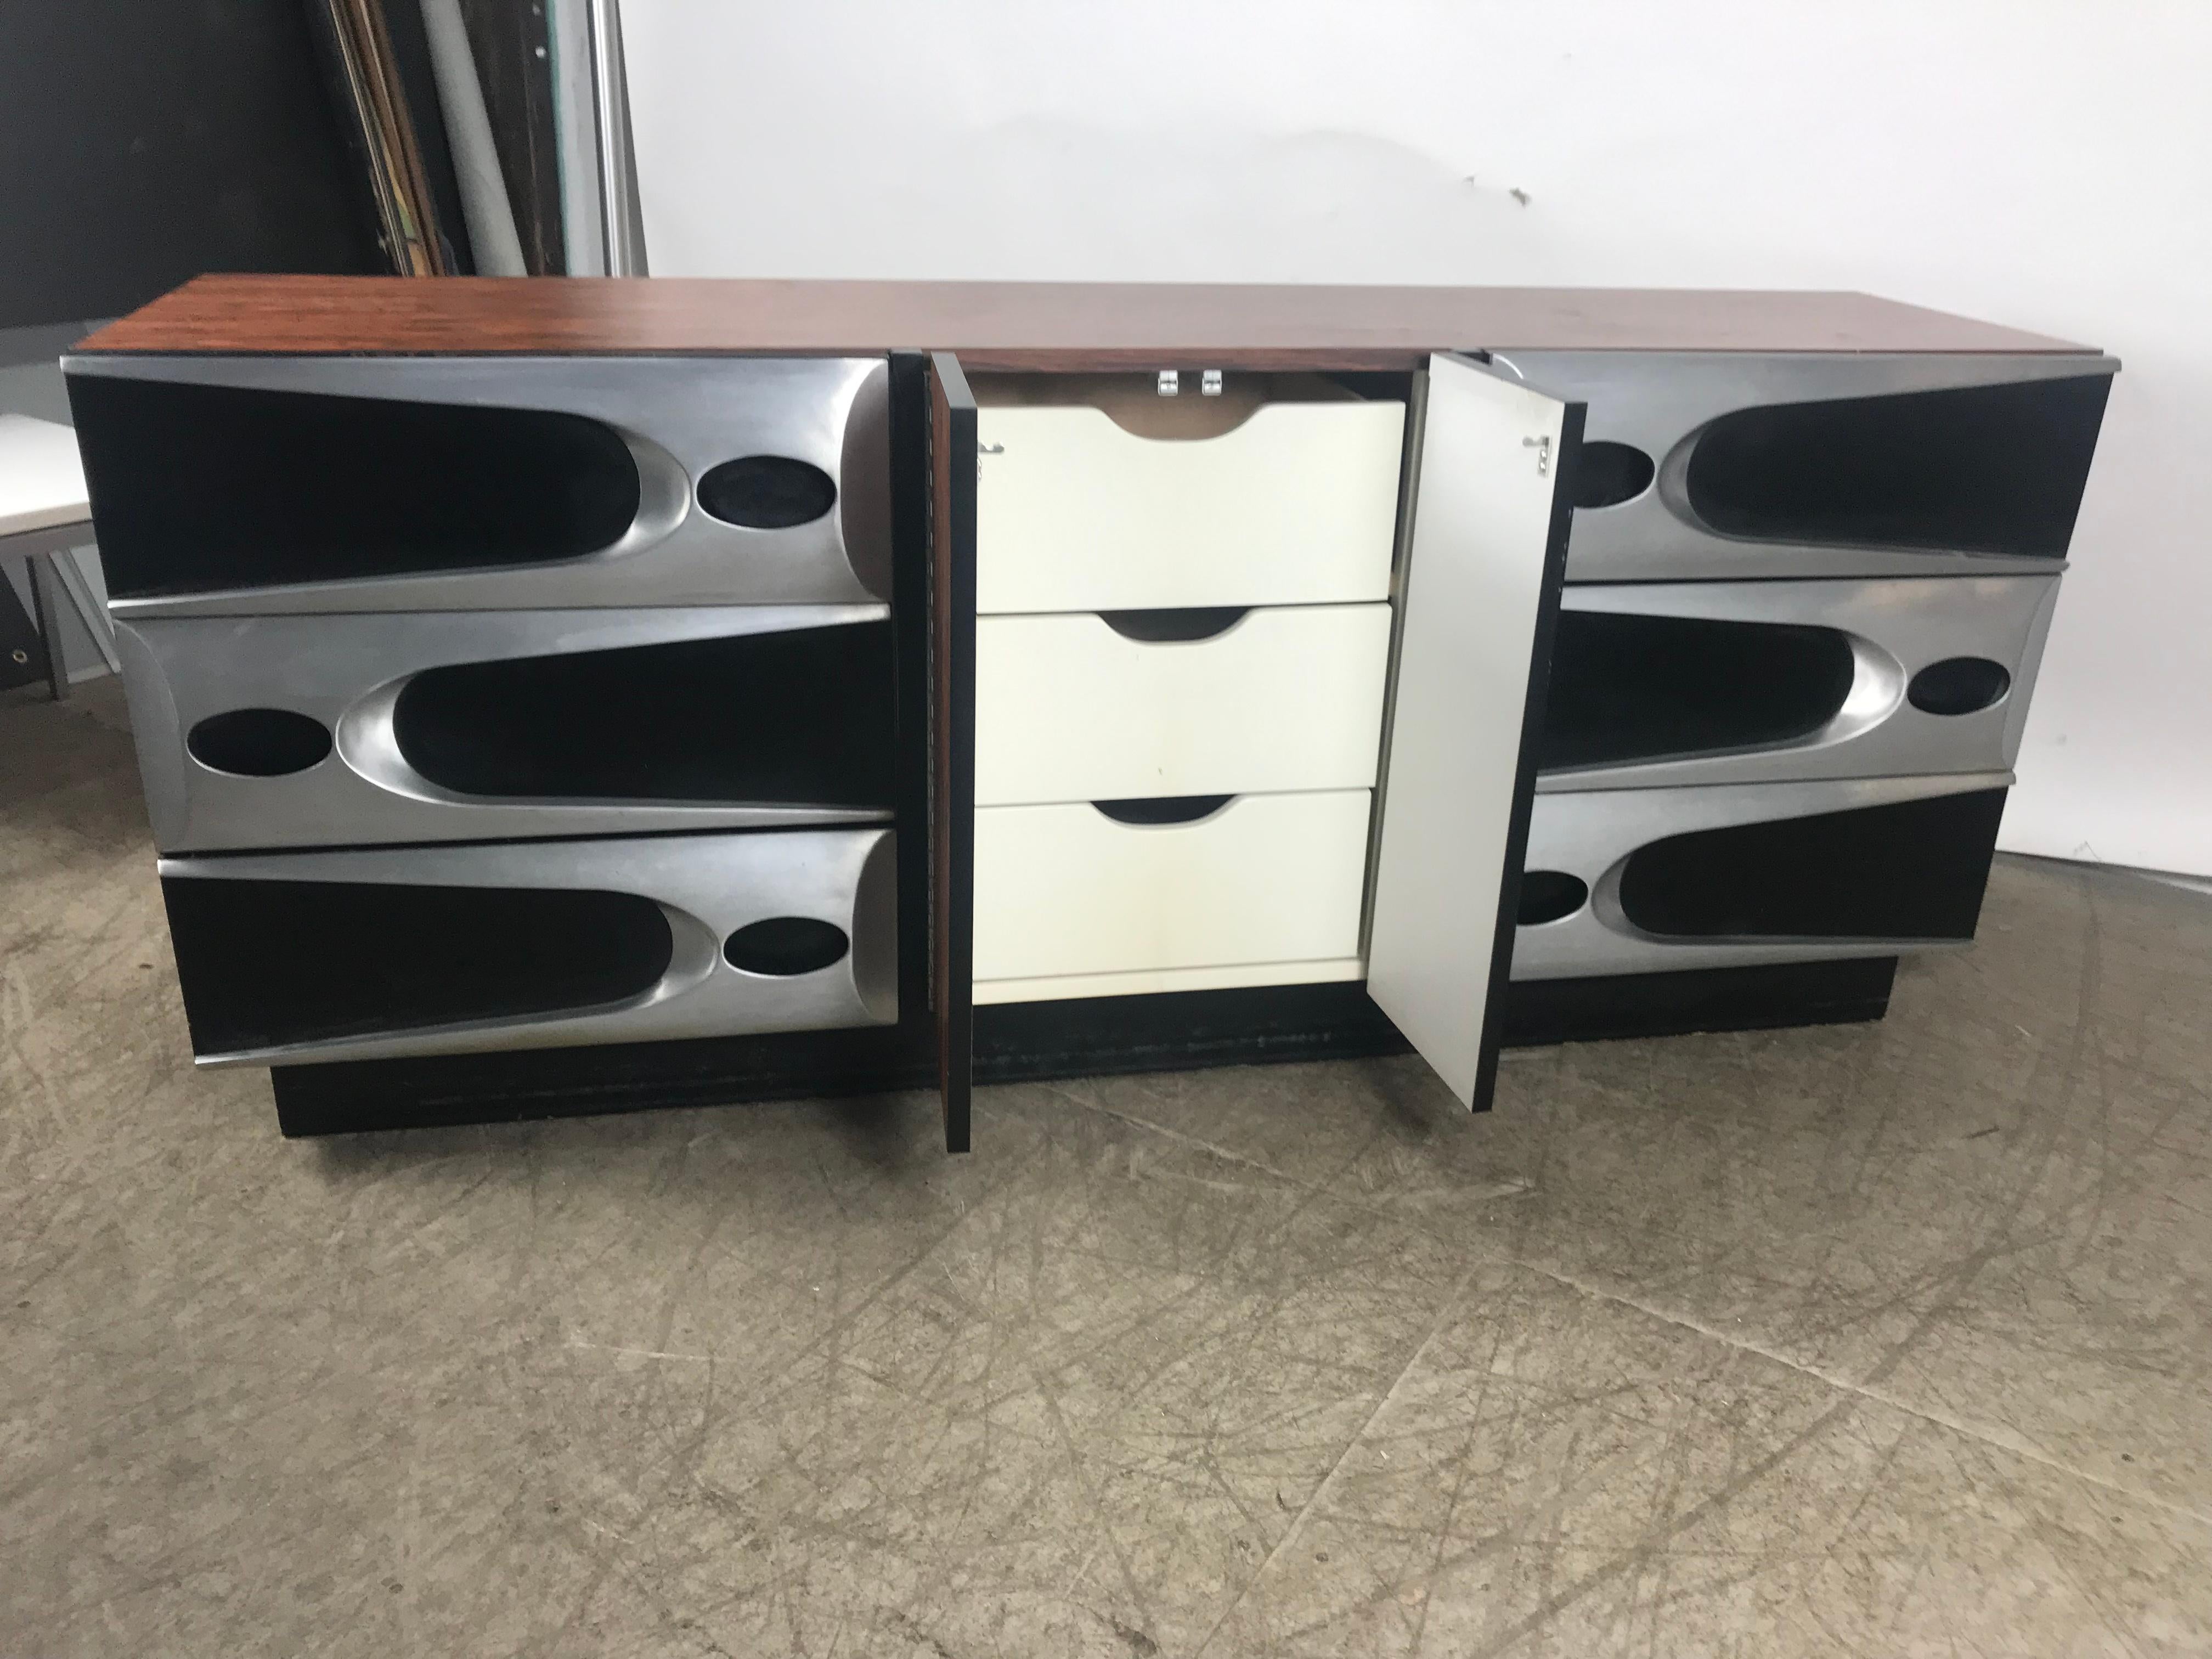 Modernist. Space age 9-drawer dresser. Elegance blended with Space Age design, most unusual!!! Rosewood melamine (laminate) and aluminum, dated 1974. Three drawers on left. Three drawers on right, center hinged door with three drawers behind. Hand